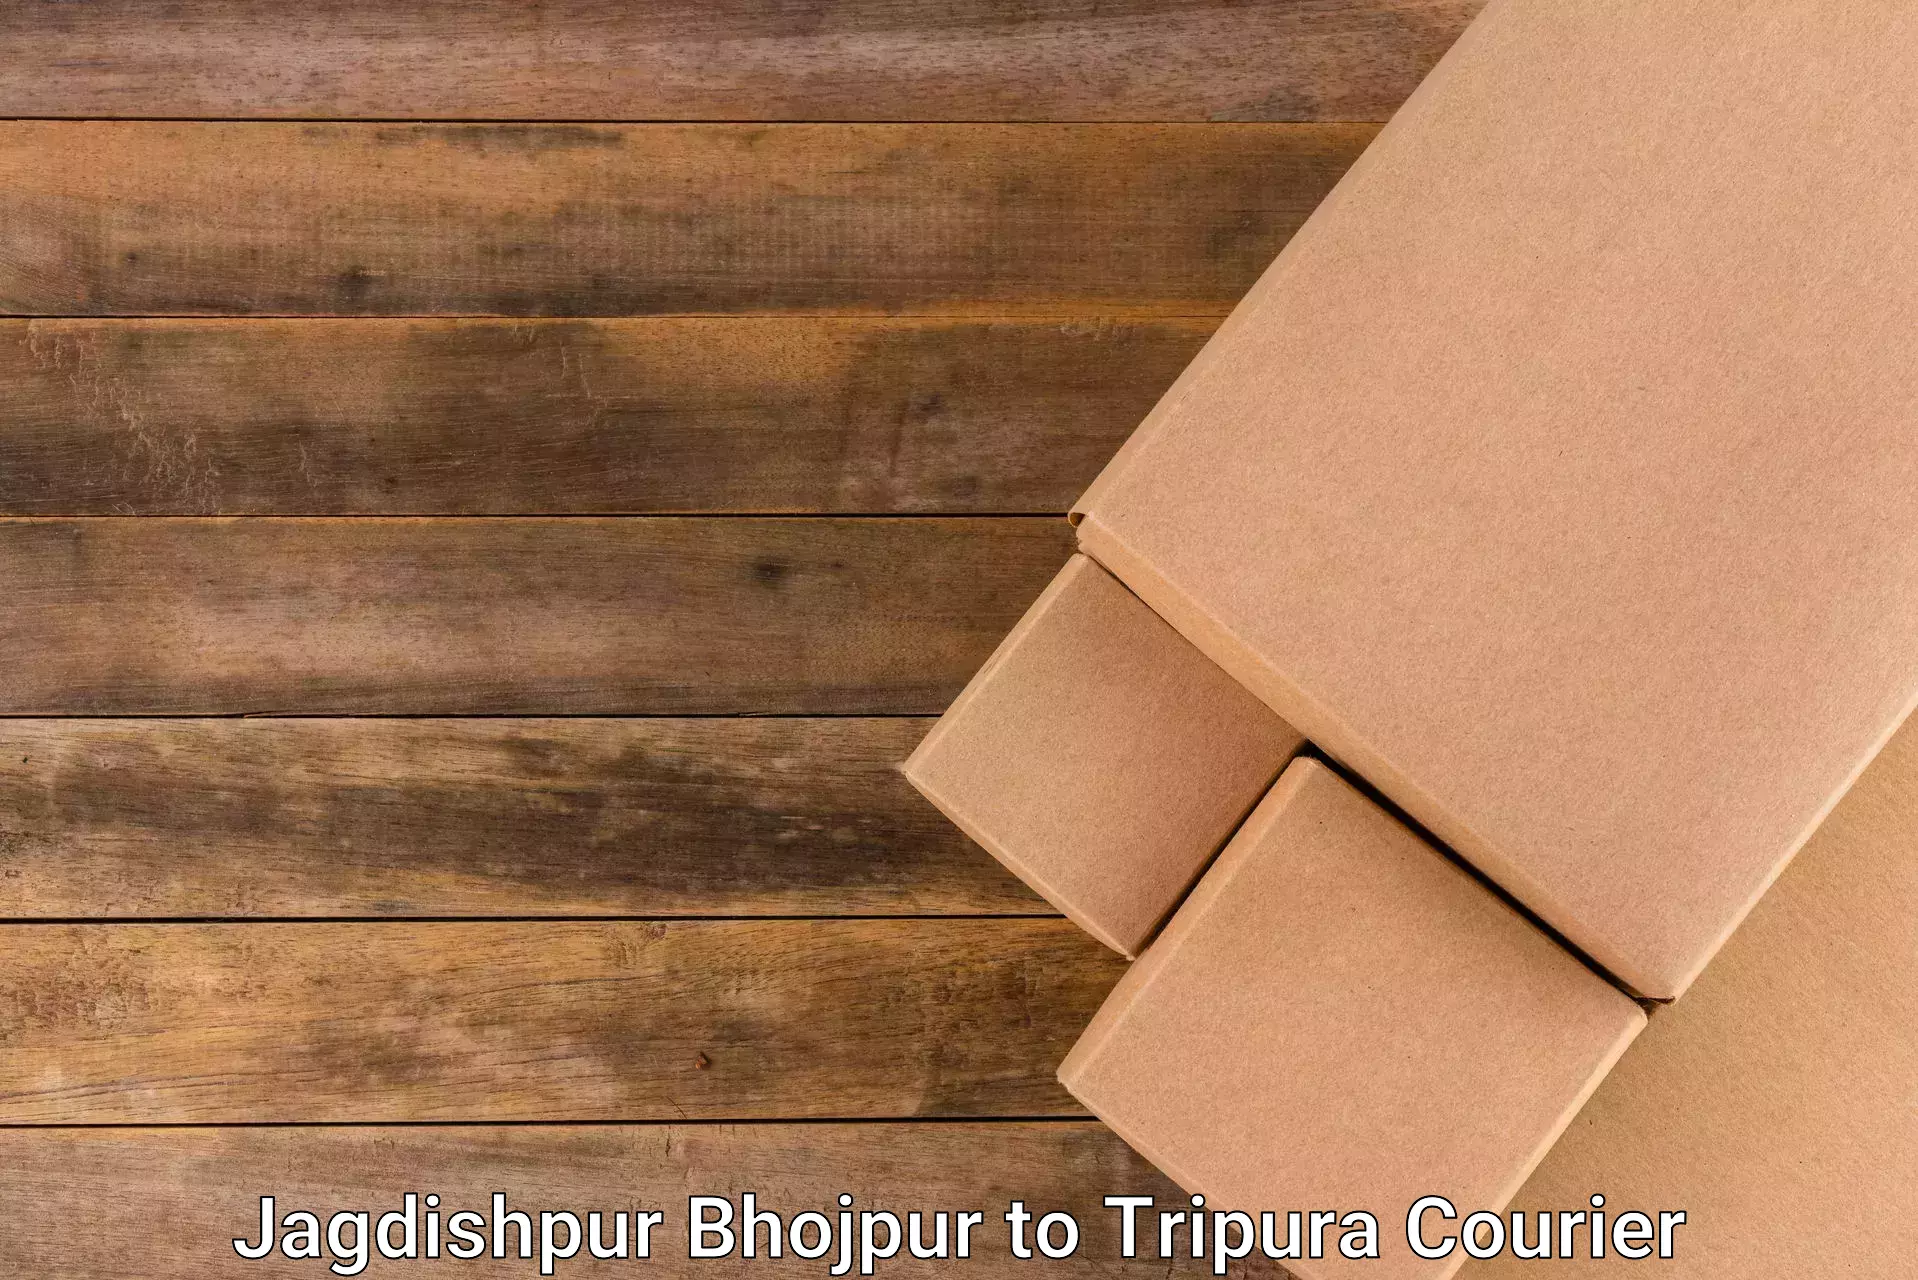 On-time delivery services Jagdishpur Bhojpur to Udaipur Tripura